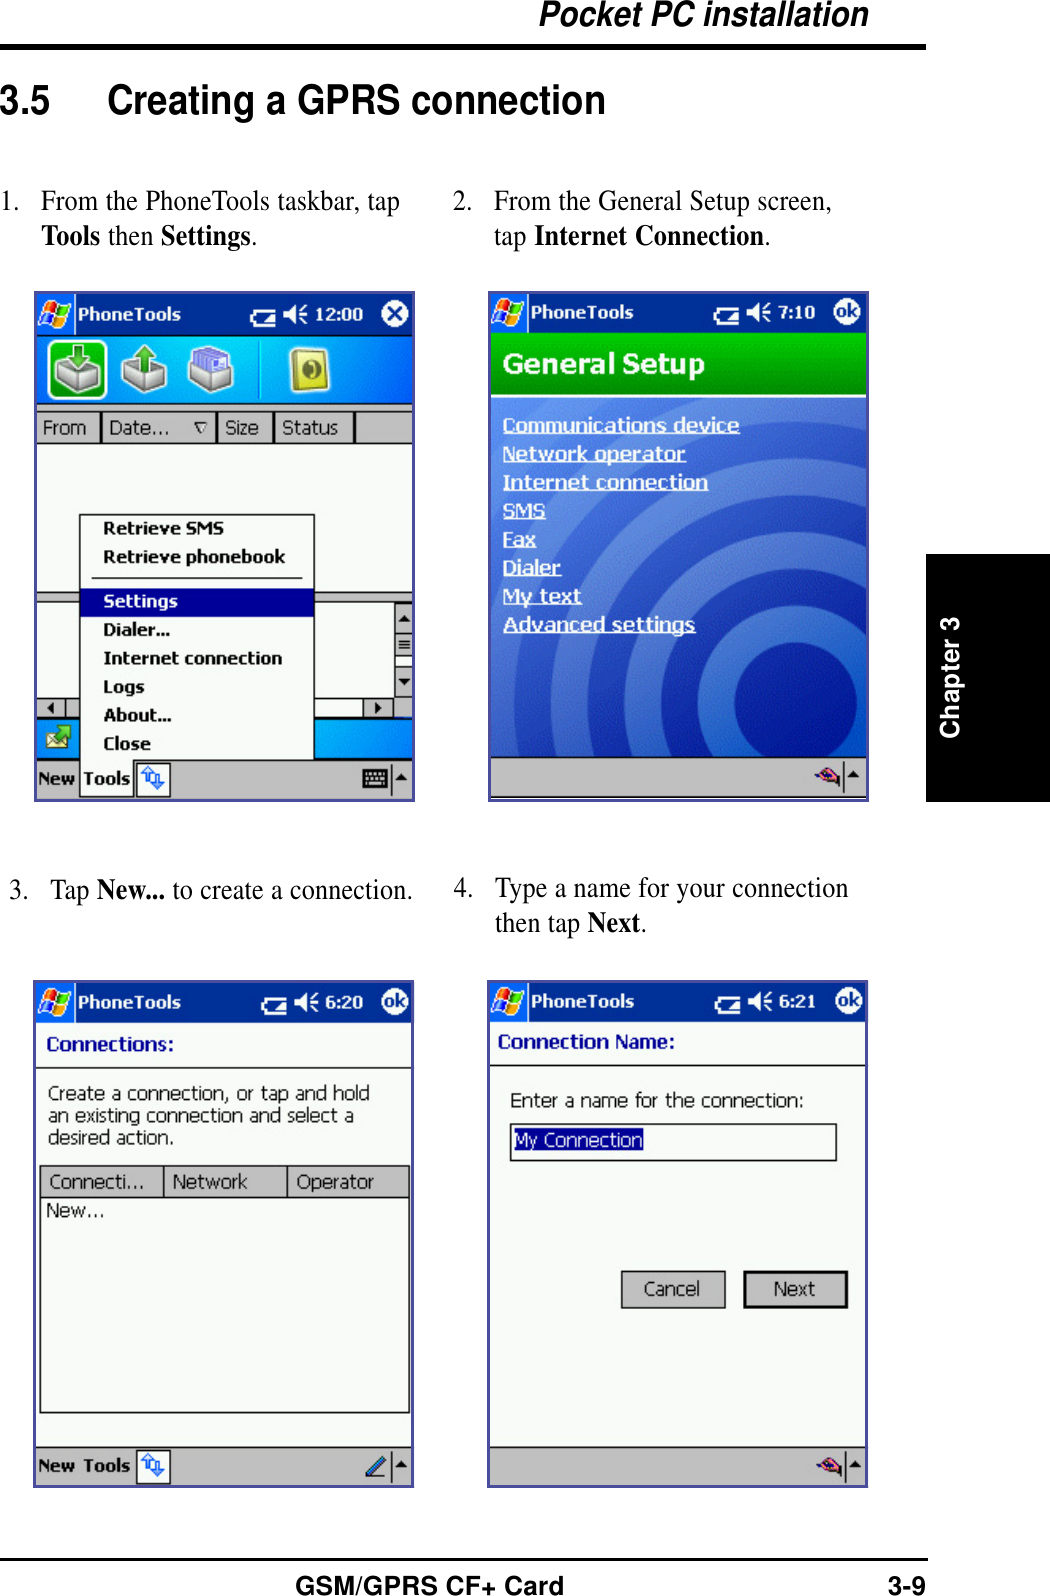 Chapter 3Pocket PC installationGSM/GPRS CF+ Card 3-93.5 Creating a GPRS connection1. From the PhoneTools taskbar, tapTools then Settings.3. Tap New... to create a connection.2. From the General Setup screen,tap Internet Connection.4. Type a name for your connectionthen tap Next.